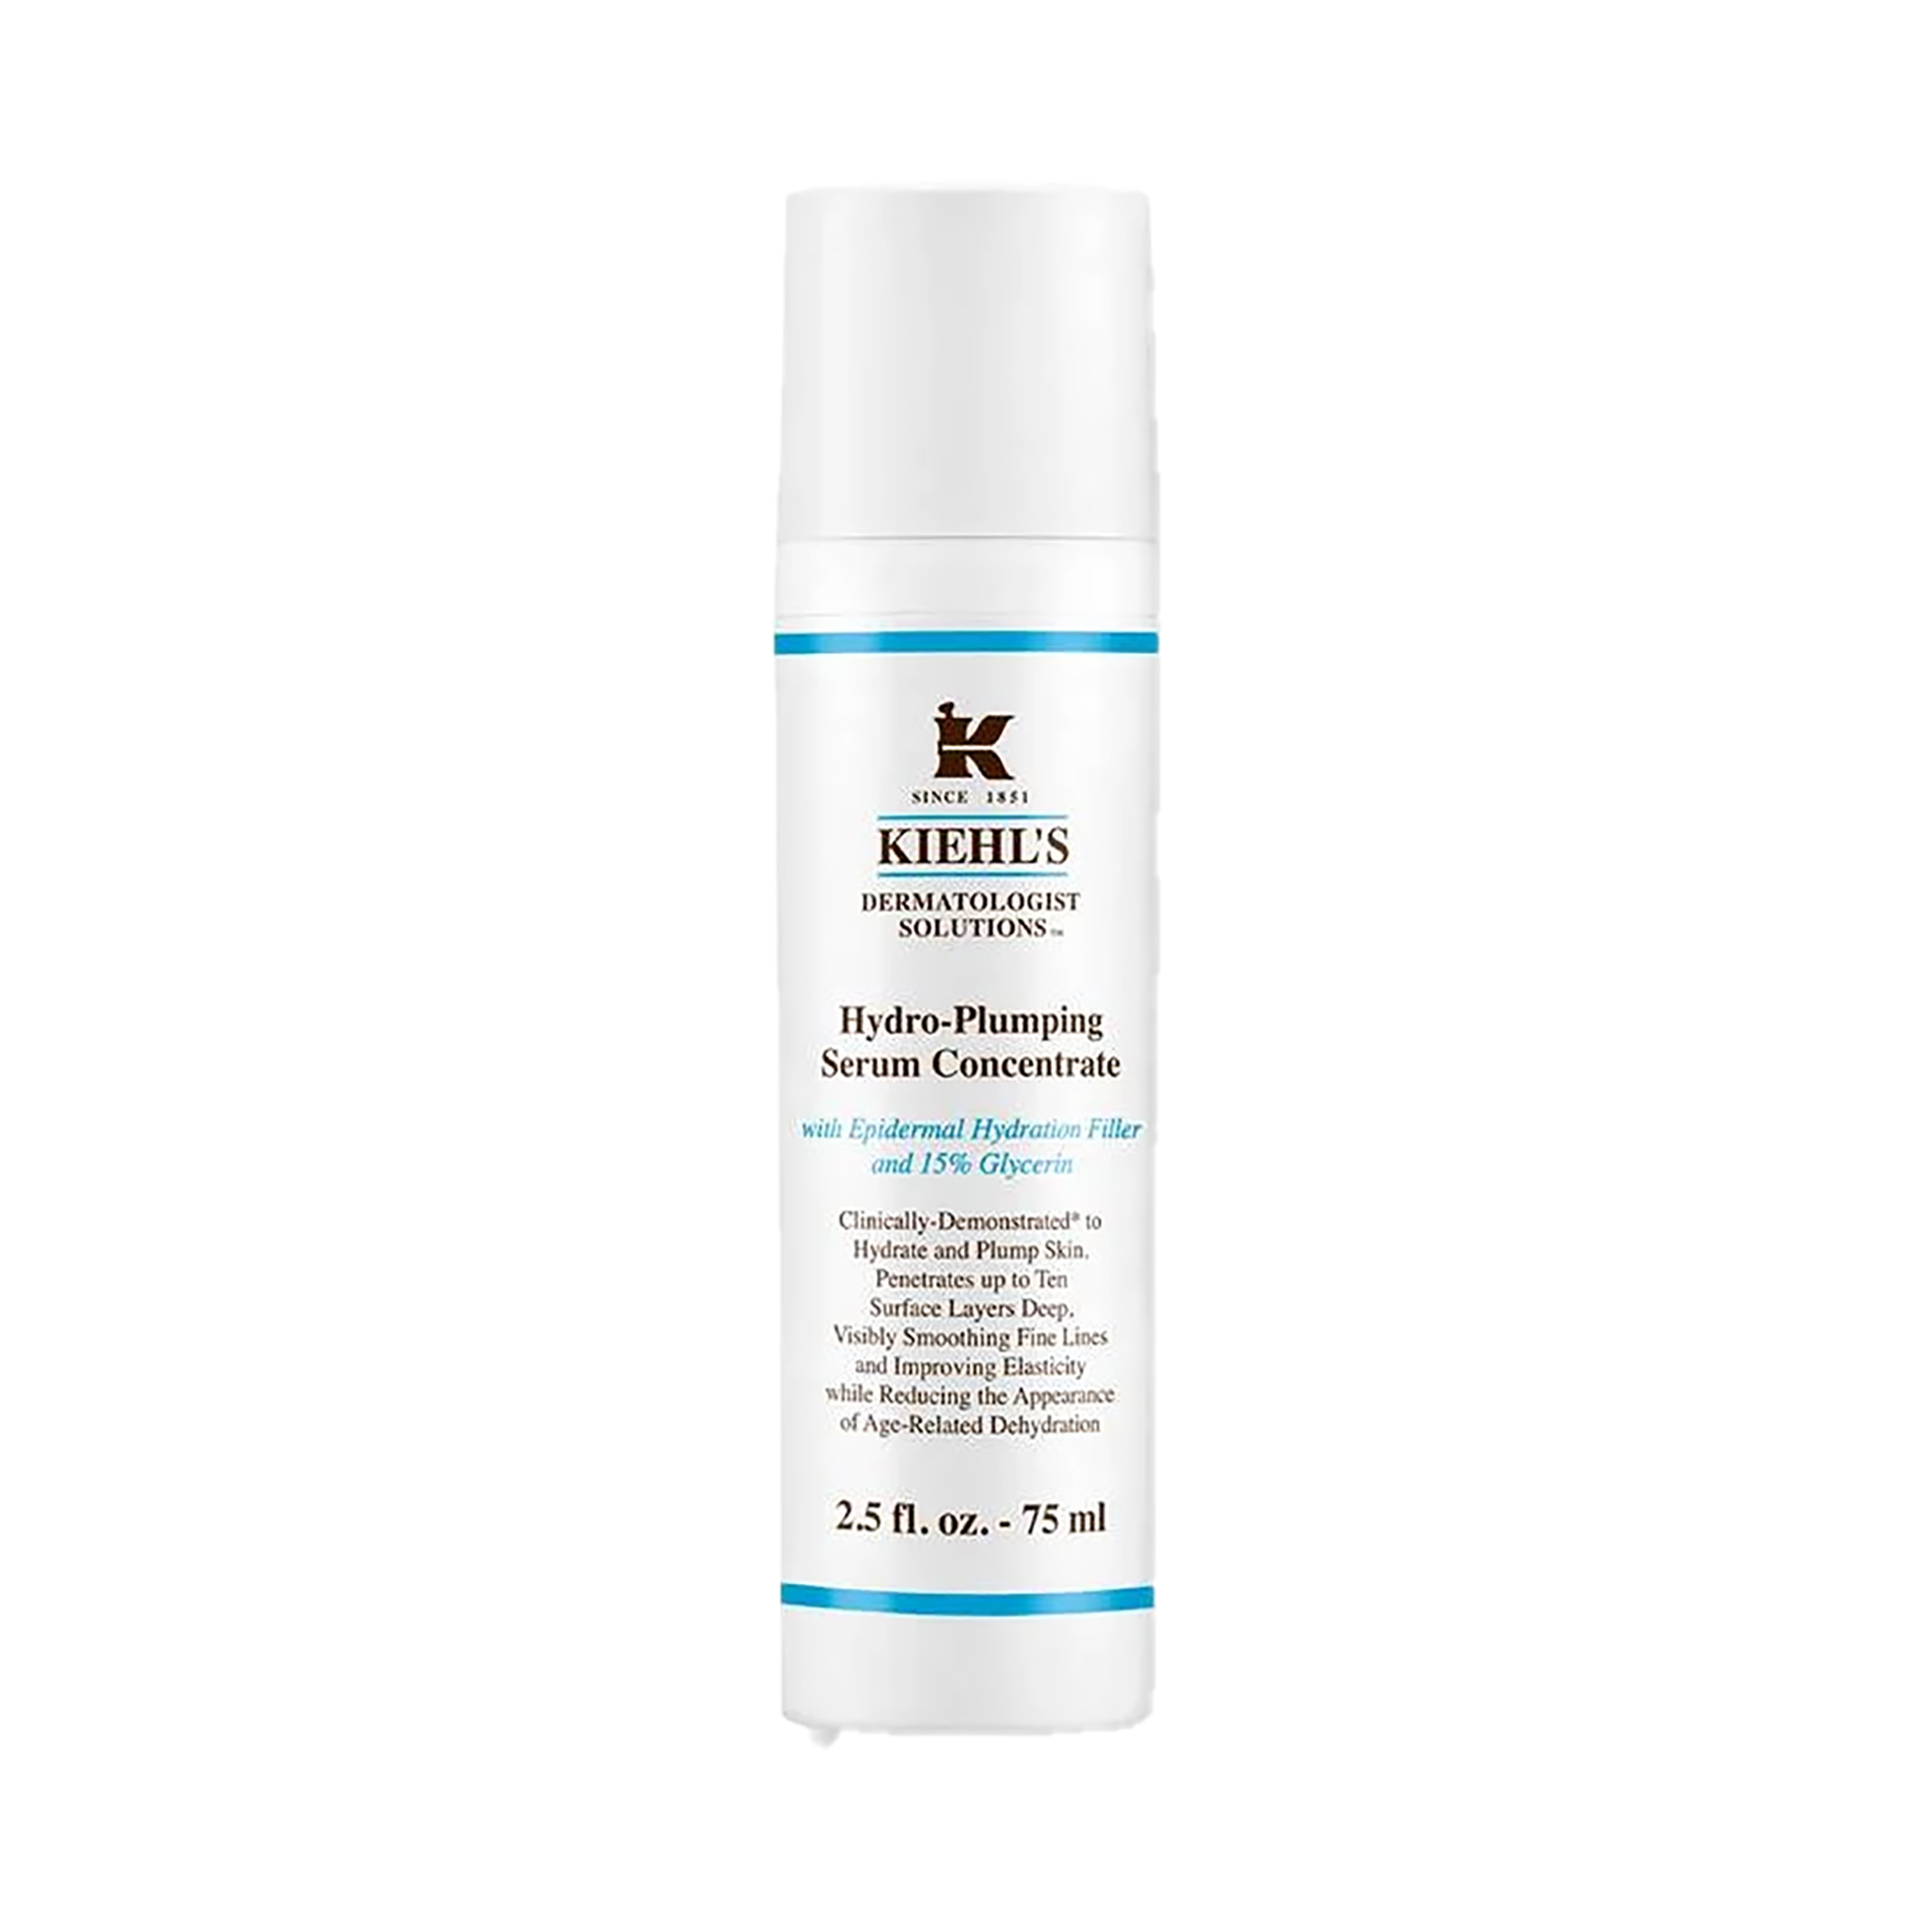 Kiehl's Hydro-Plumping Hydrating Serum Concentrate / 2.5OZ